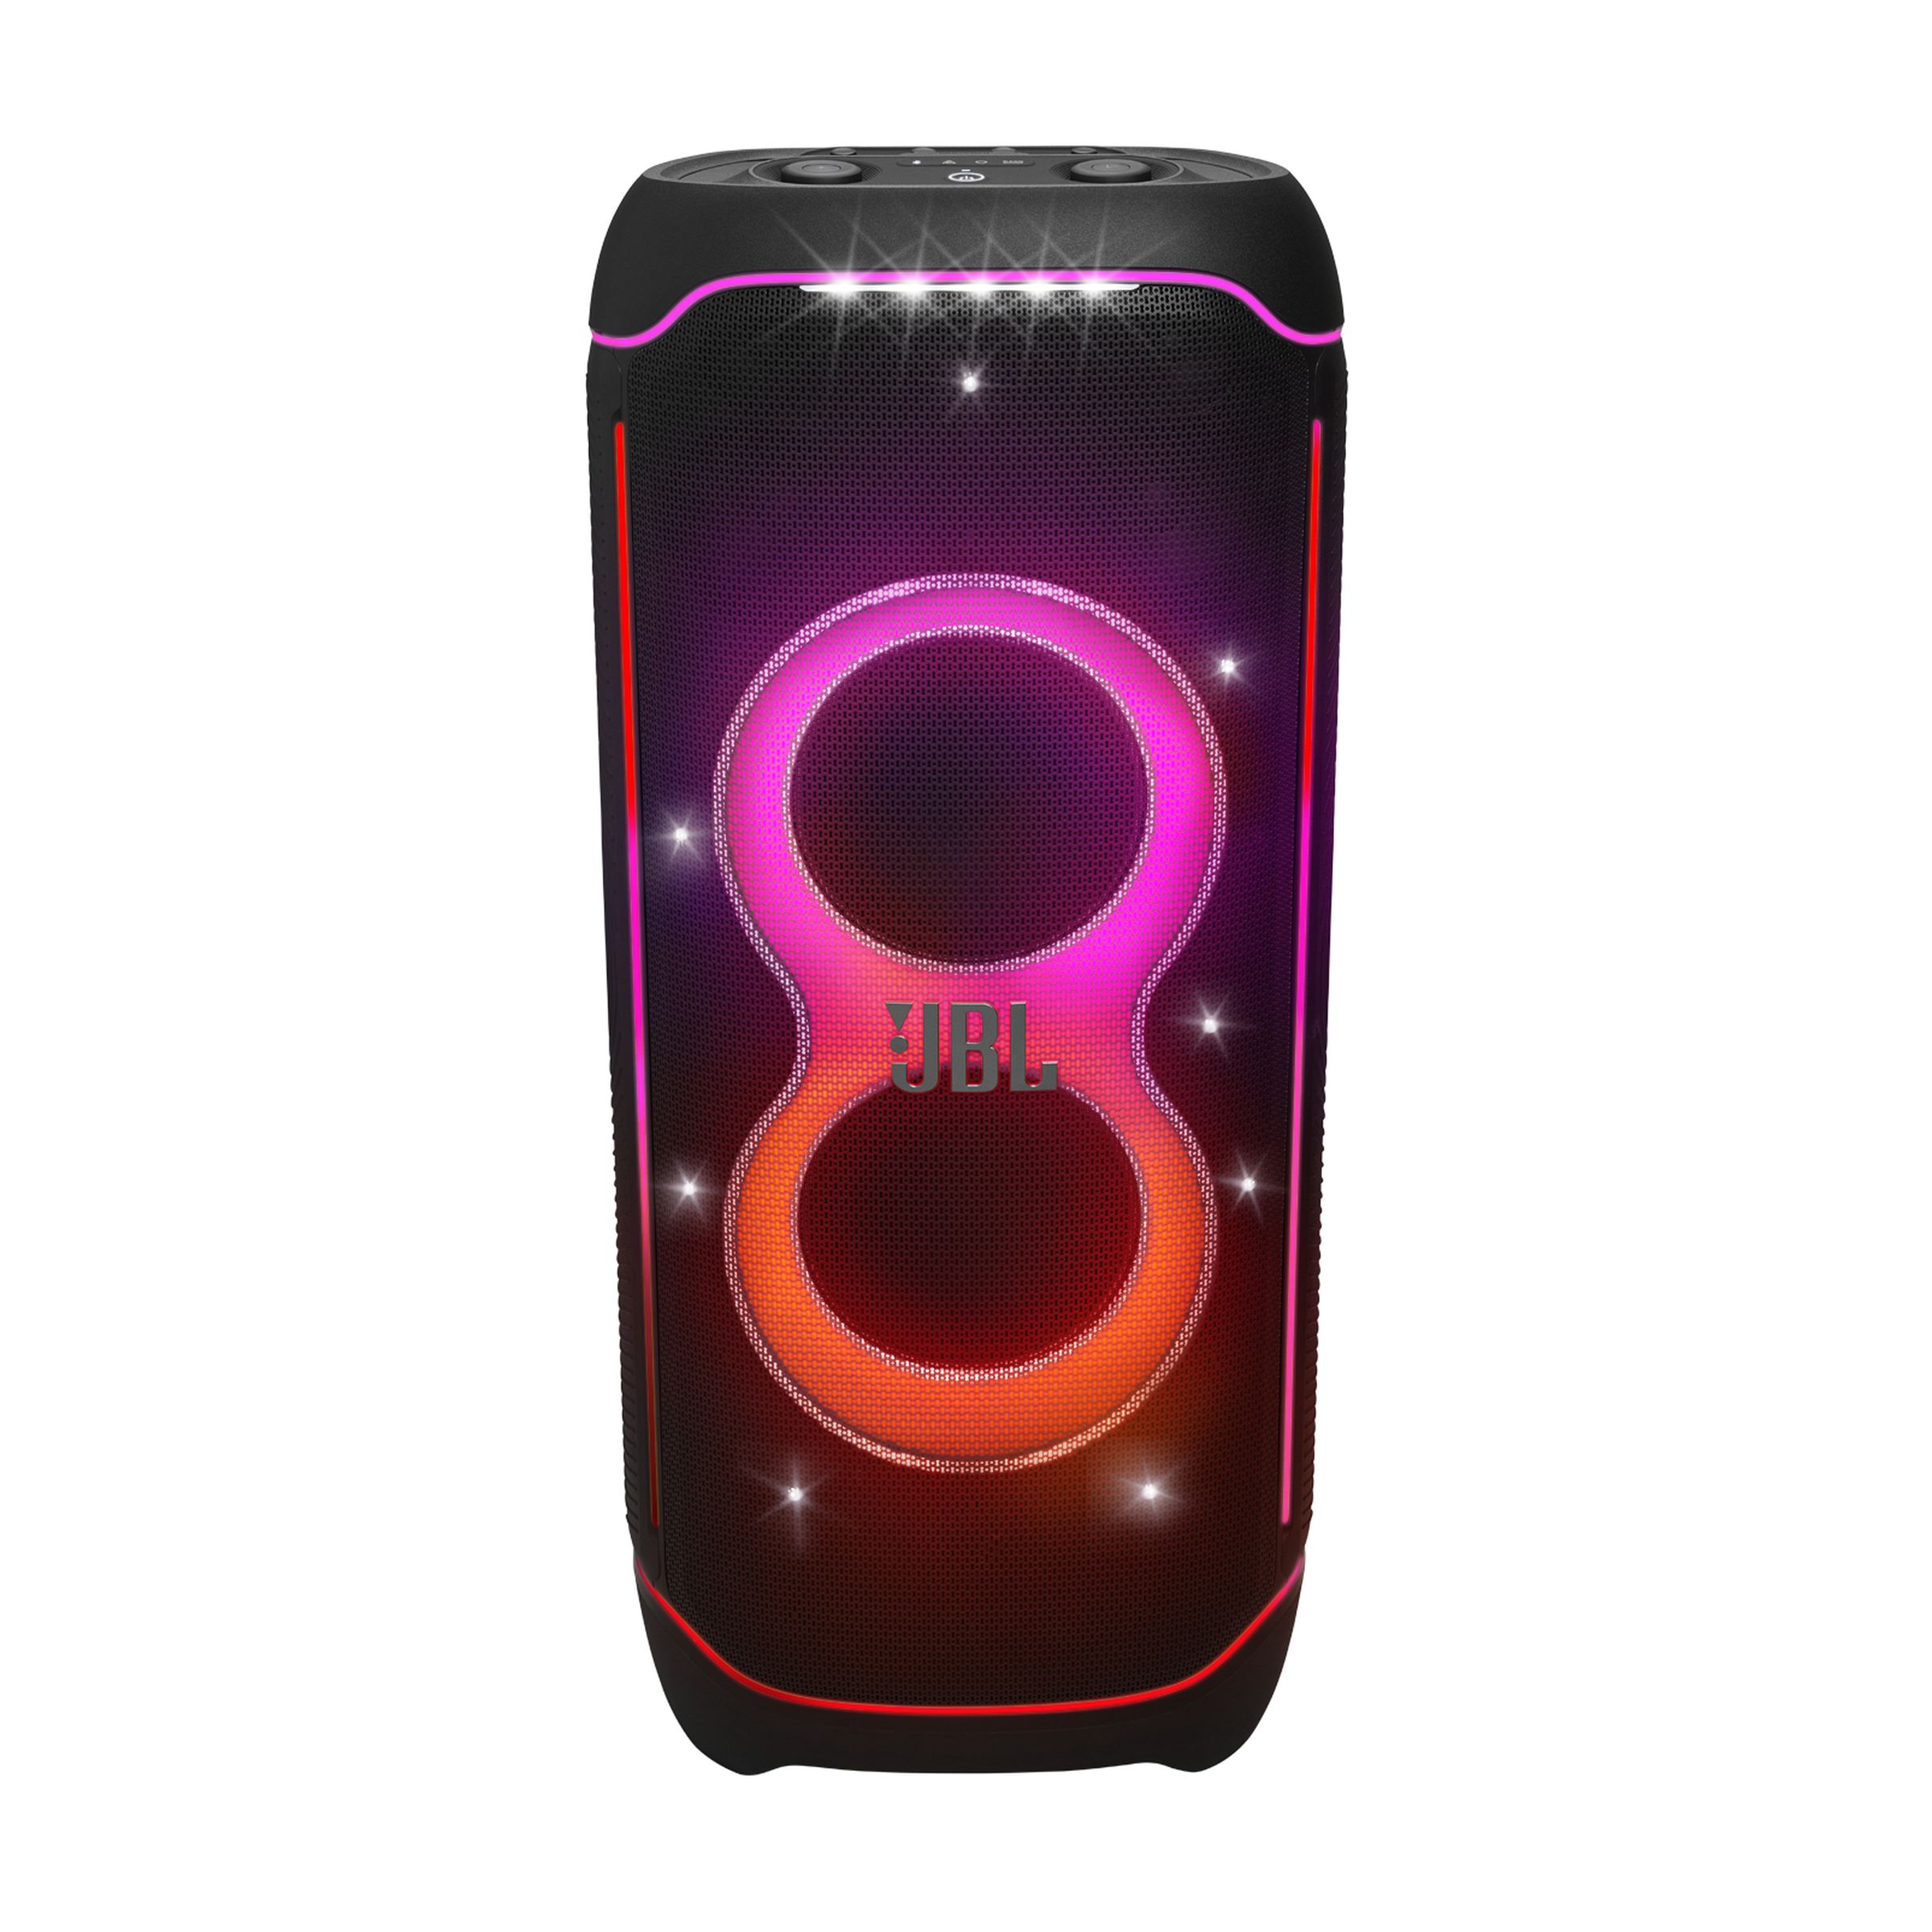 A picture of the partyBox Ultimate. It has two RGB-ringed subwoofers and the speaker grill has an RGB strip surrounding it. It’s tall and skinny, standing on one end.